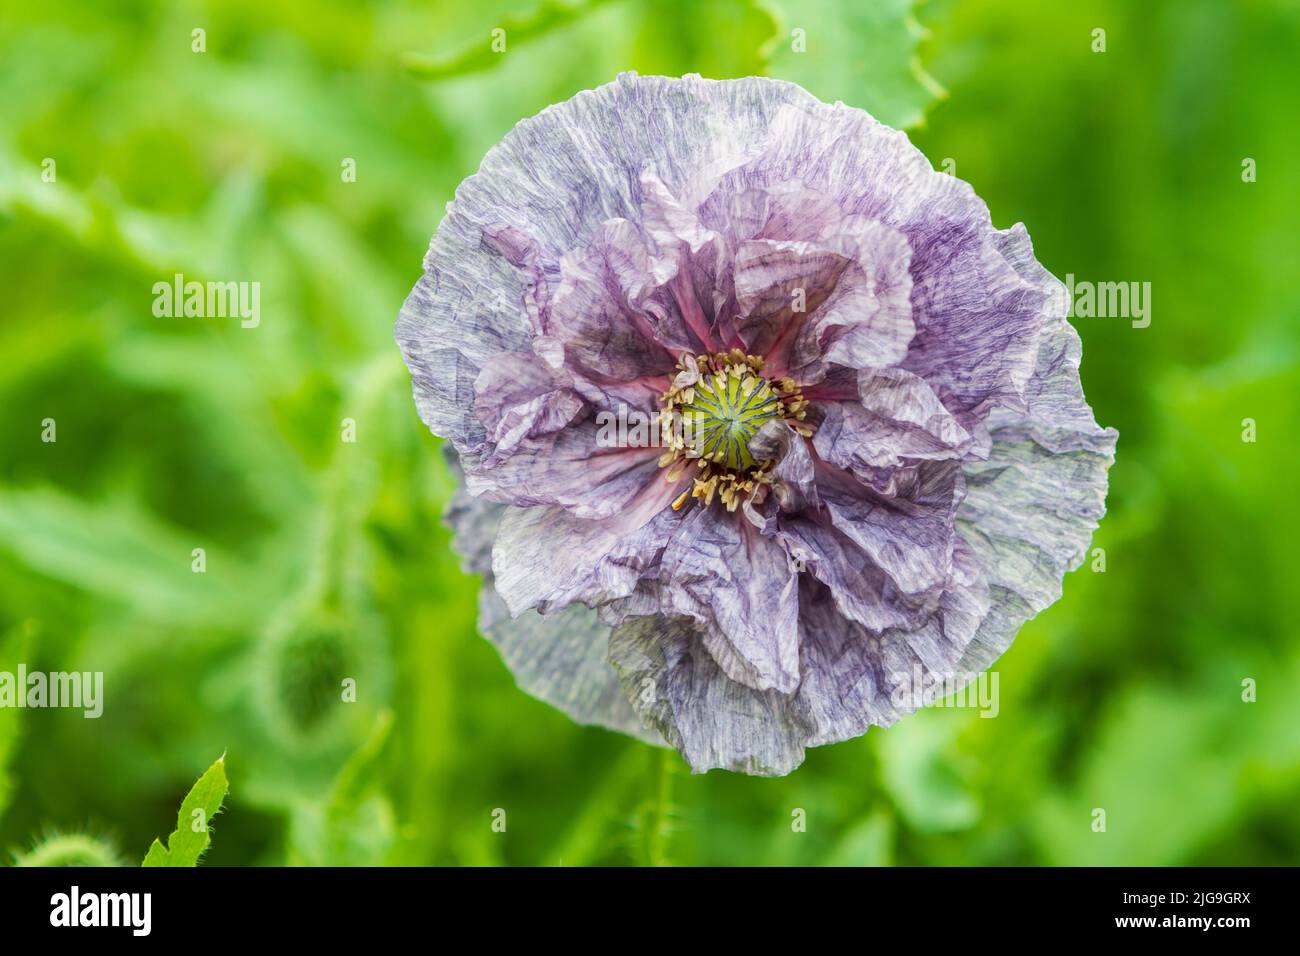 A closeup view looking down on a single ruffled Amazing Grey Shirley Poppy (Papaver rhoeas) flower in full bloom against a bright green background. Stock Photo